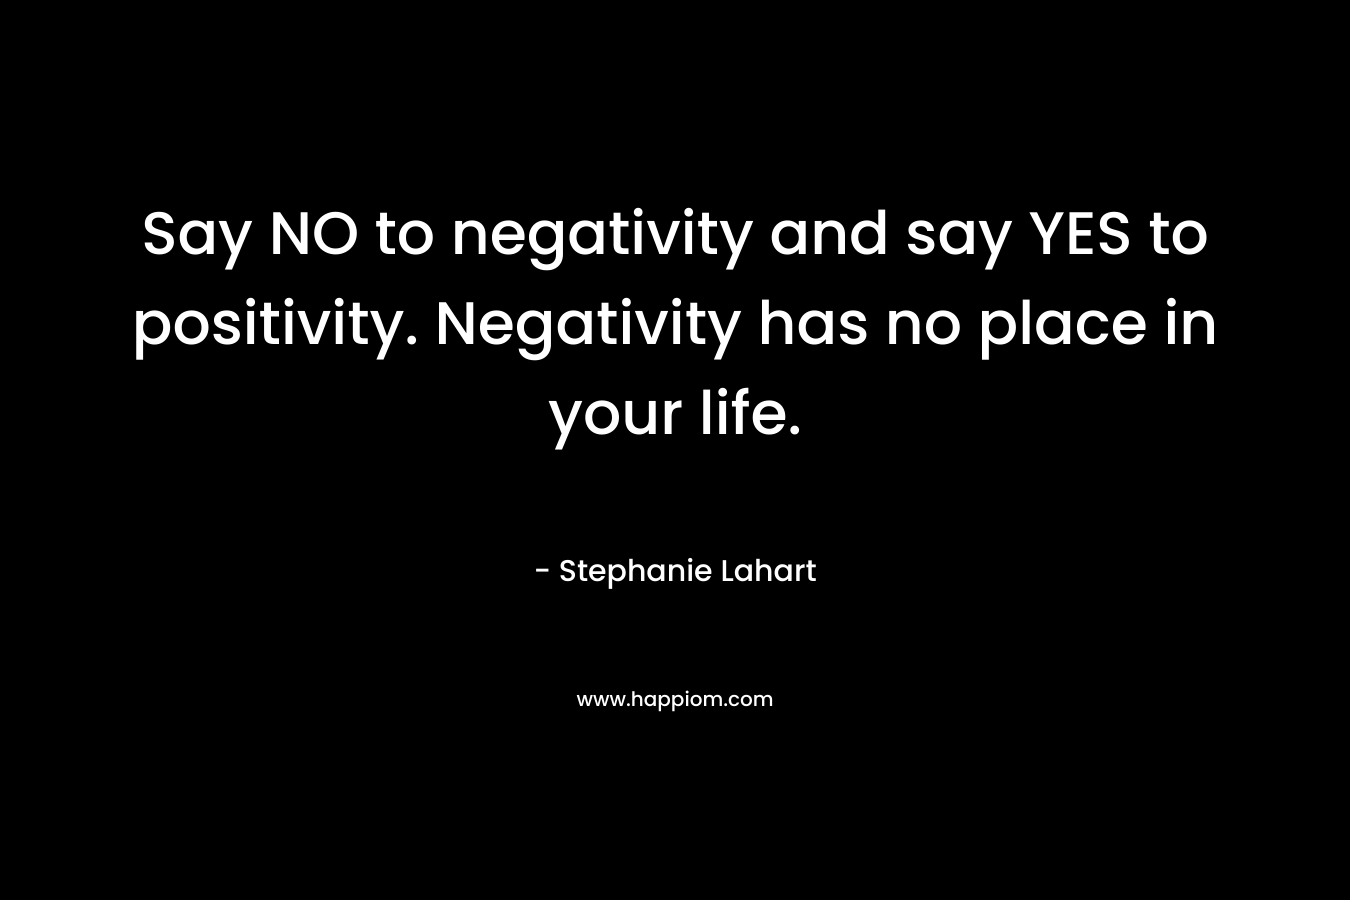 Say NO to negativity and say YES to positivity. Negativity has no place in your life.